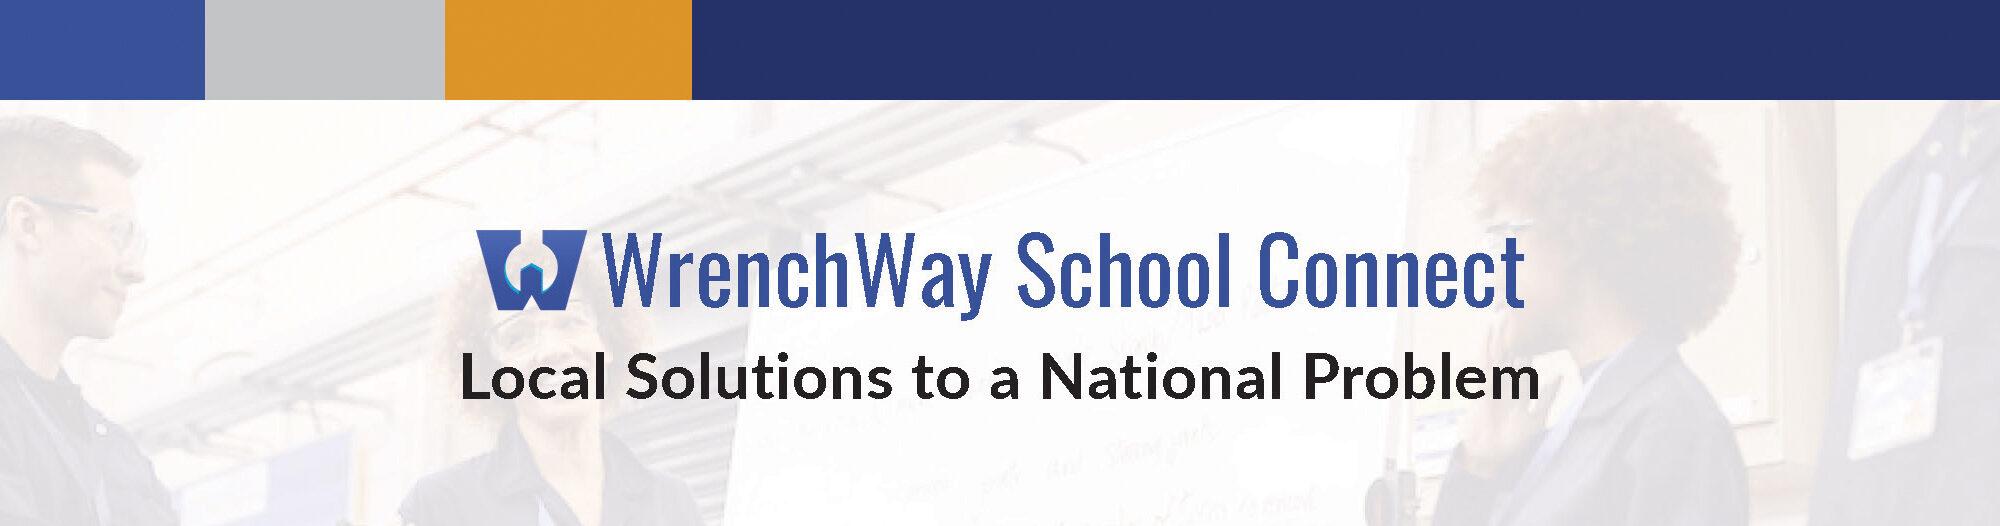 Wrench Way School Connect graphic